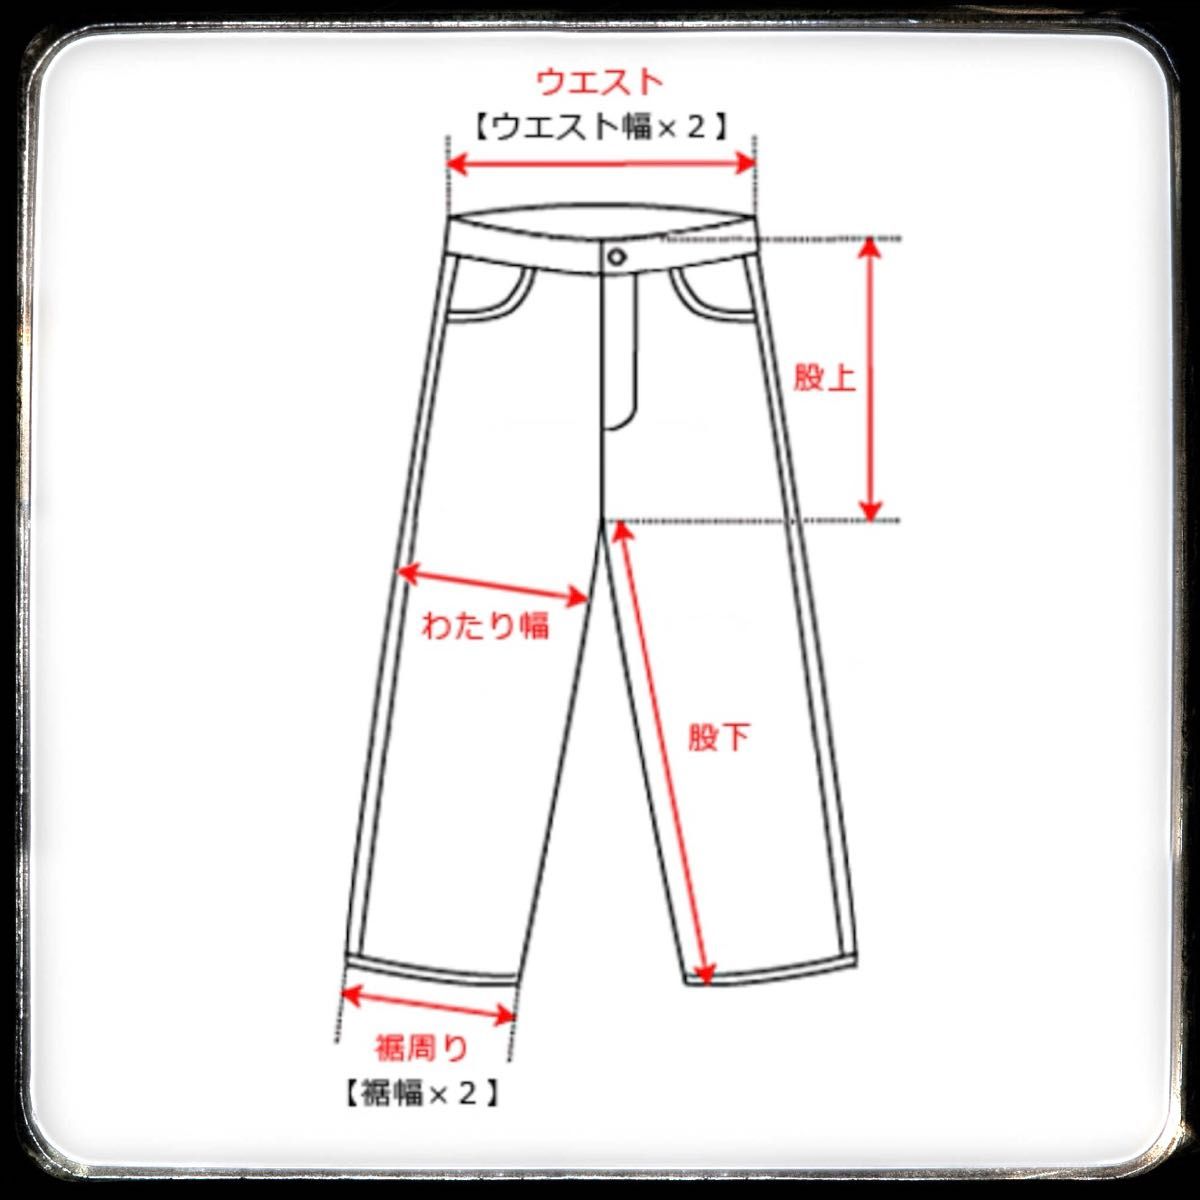 【size:W30】Levi's Engineered Jeans EJ102-0002 10th Anniversary